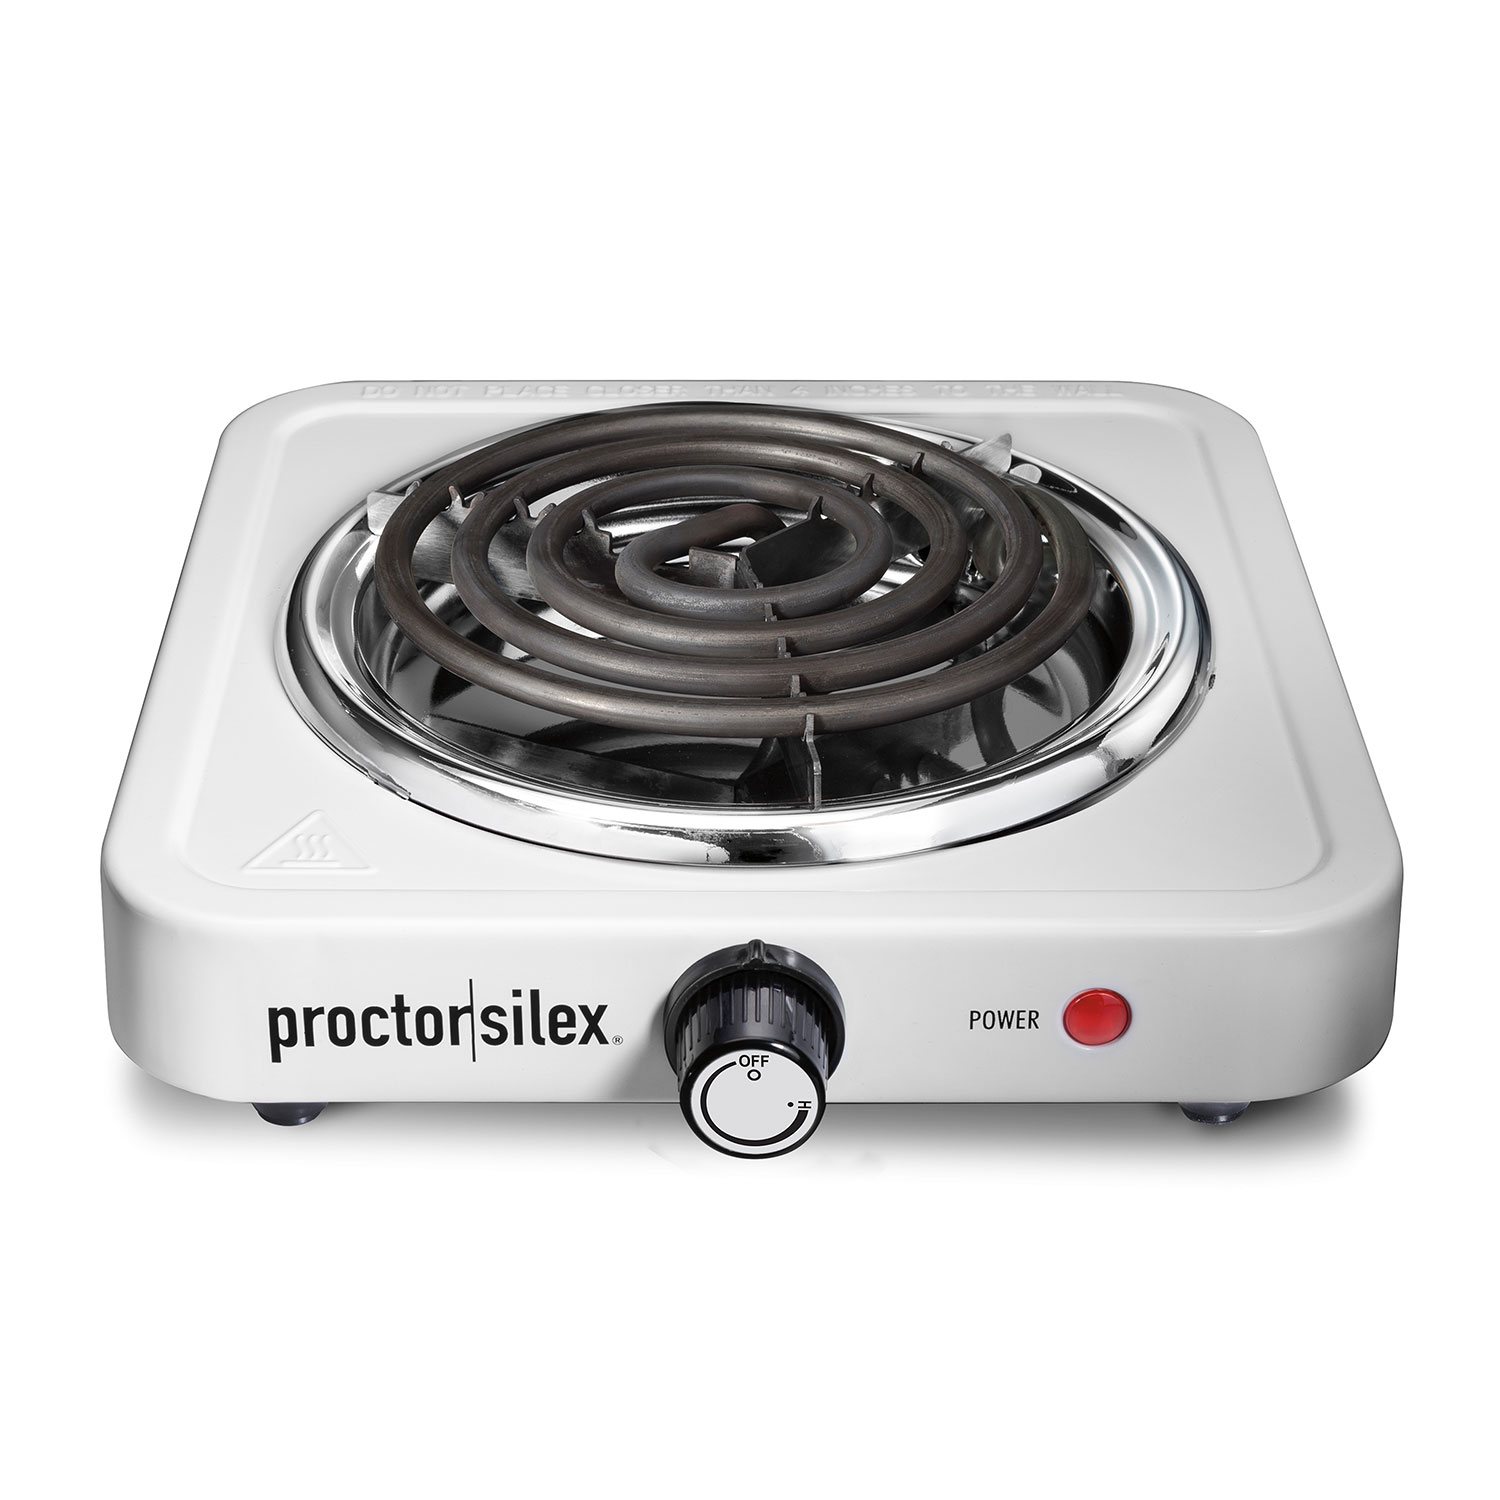 Proctor Silex Electric Single Burner Cooktop, Compact and Portable, Adjustable Temperature Hot Plate, 1200 Watts, 34106, White & Stainless